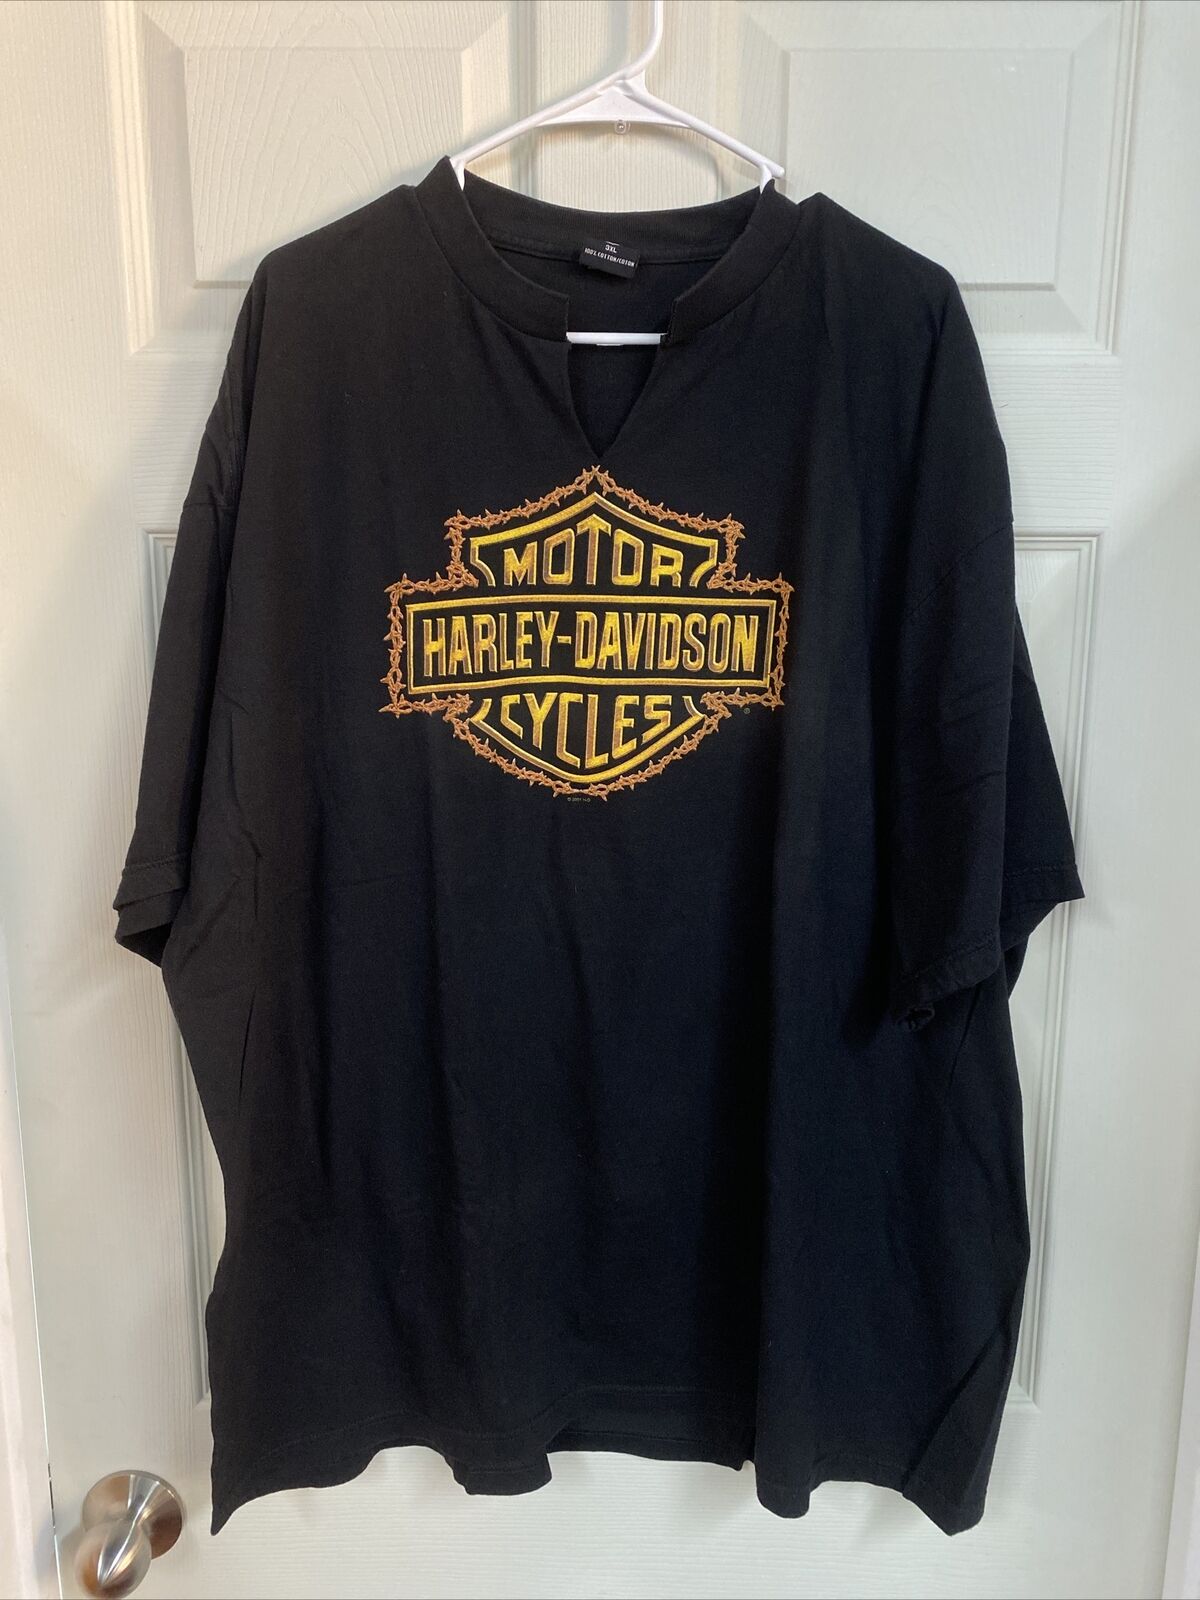 Vintage Harley Davidson MotorCycles Black T-Shirt Size 3XL Cape Cod Cycle Center